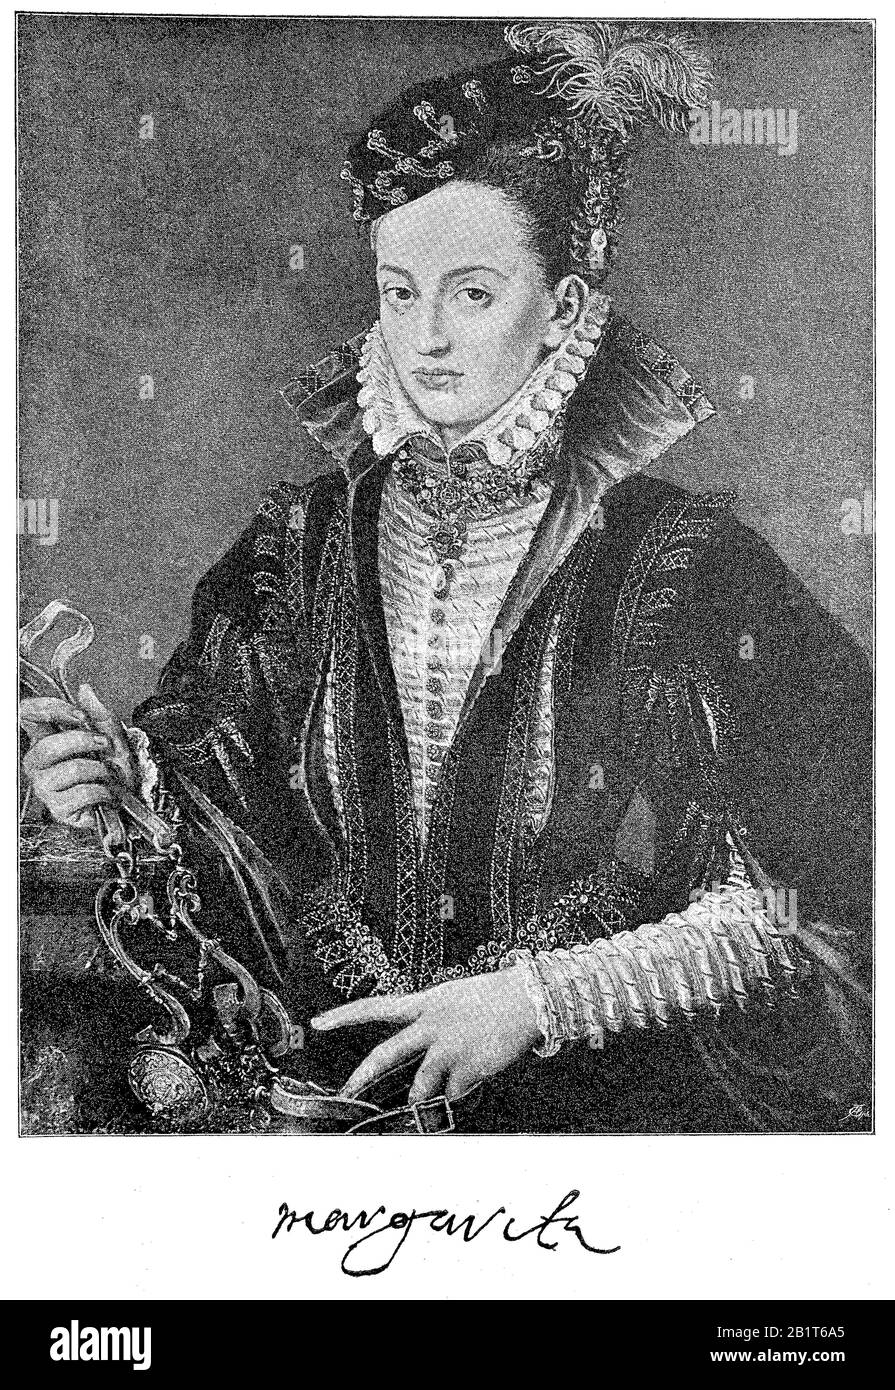 Margaret of Parma, Margherita di Parma, 5 July 1522 - 18 January 1586, was Governor of the Netherlands from 1559 to 1567 and from 1578 to 1582. She was the illegitimate daughter of the then 22-year-old Holy Roman Emperor Charles V and Johanna Maria van der Gheynst  /  Margarethe von Parma, war eine uneheliche Tochter Kaiser Karls V., Historisch, digital improved reproduction of an original from the 19th century / digitale Reproduktion einer Originalvorlage aus dem 19. Jahrhundert Stock Photo